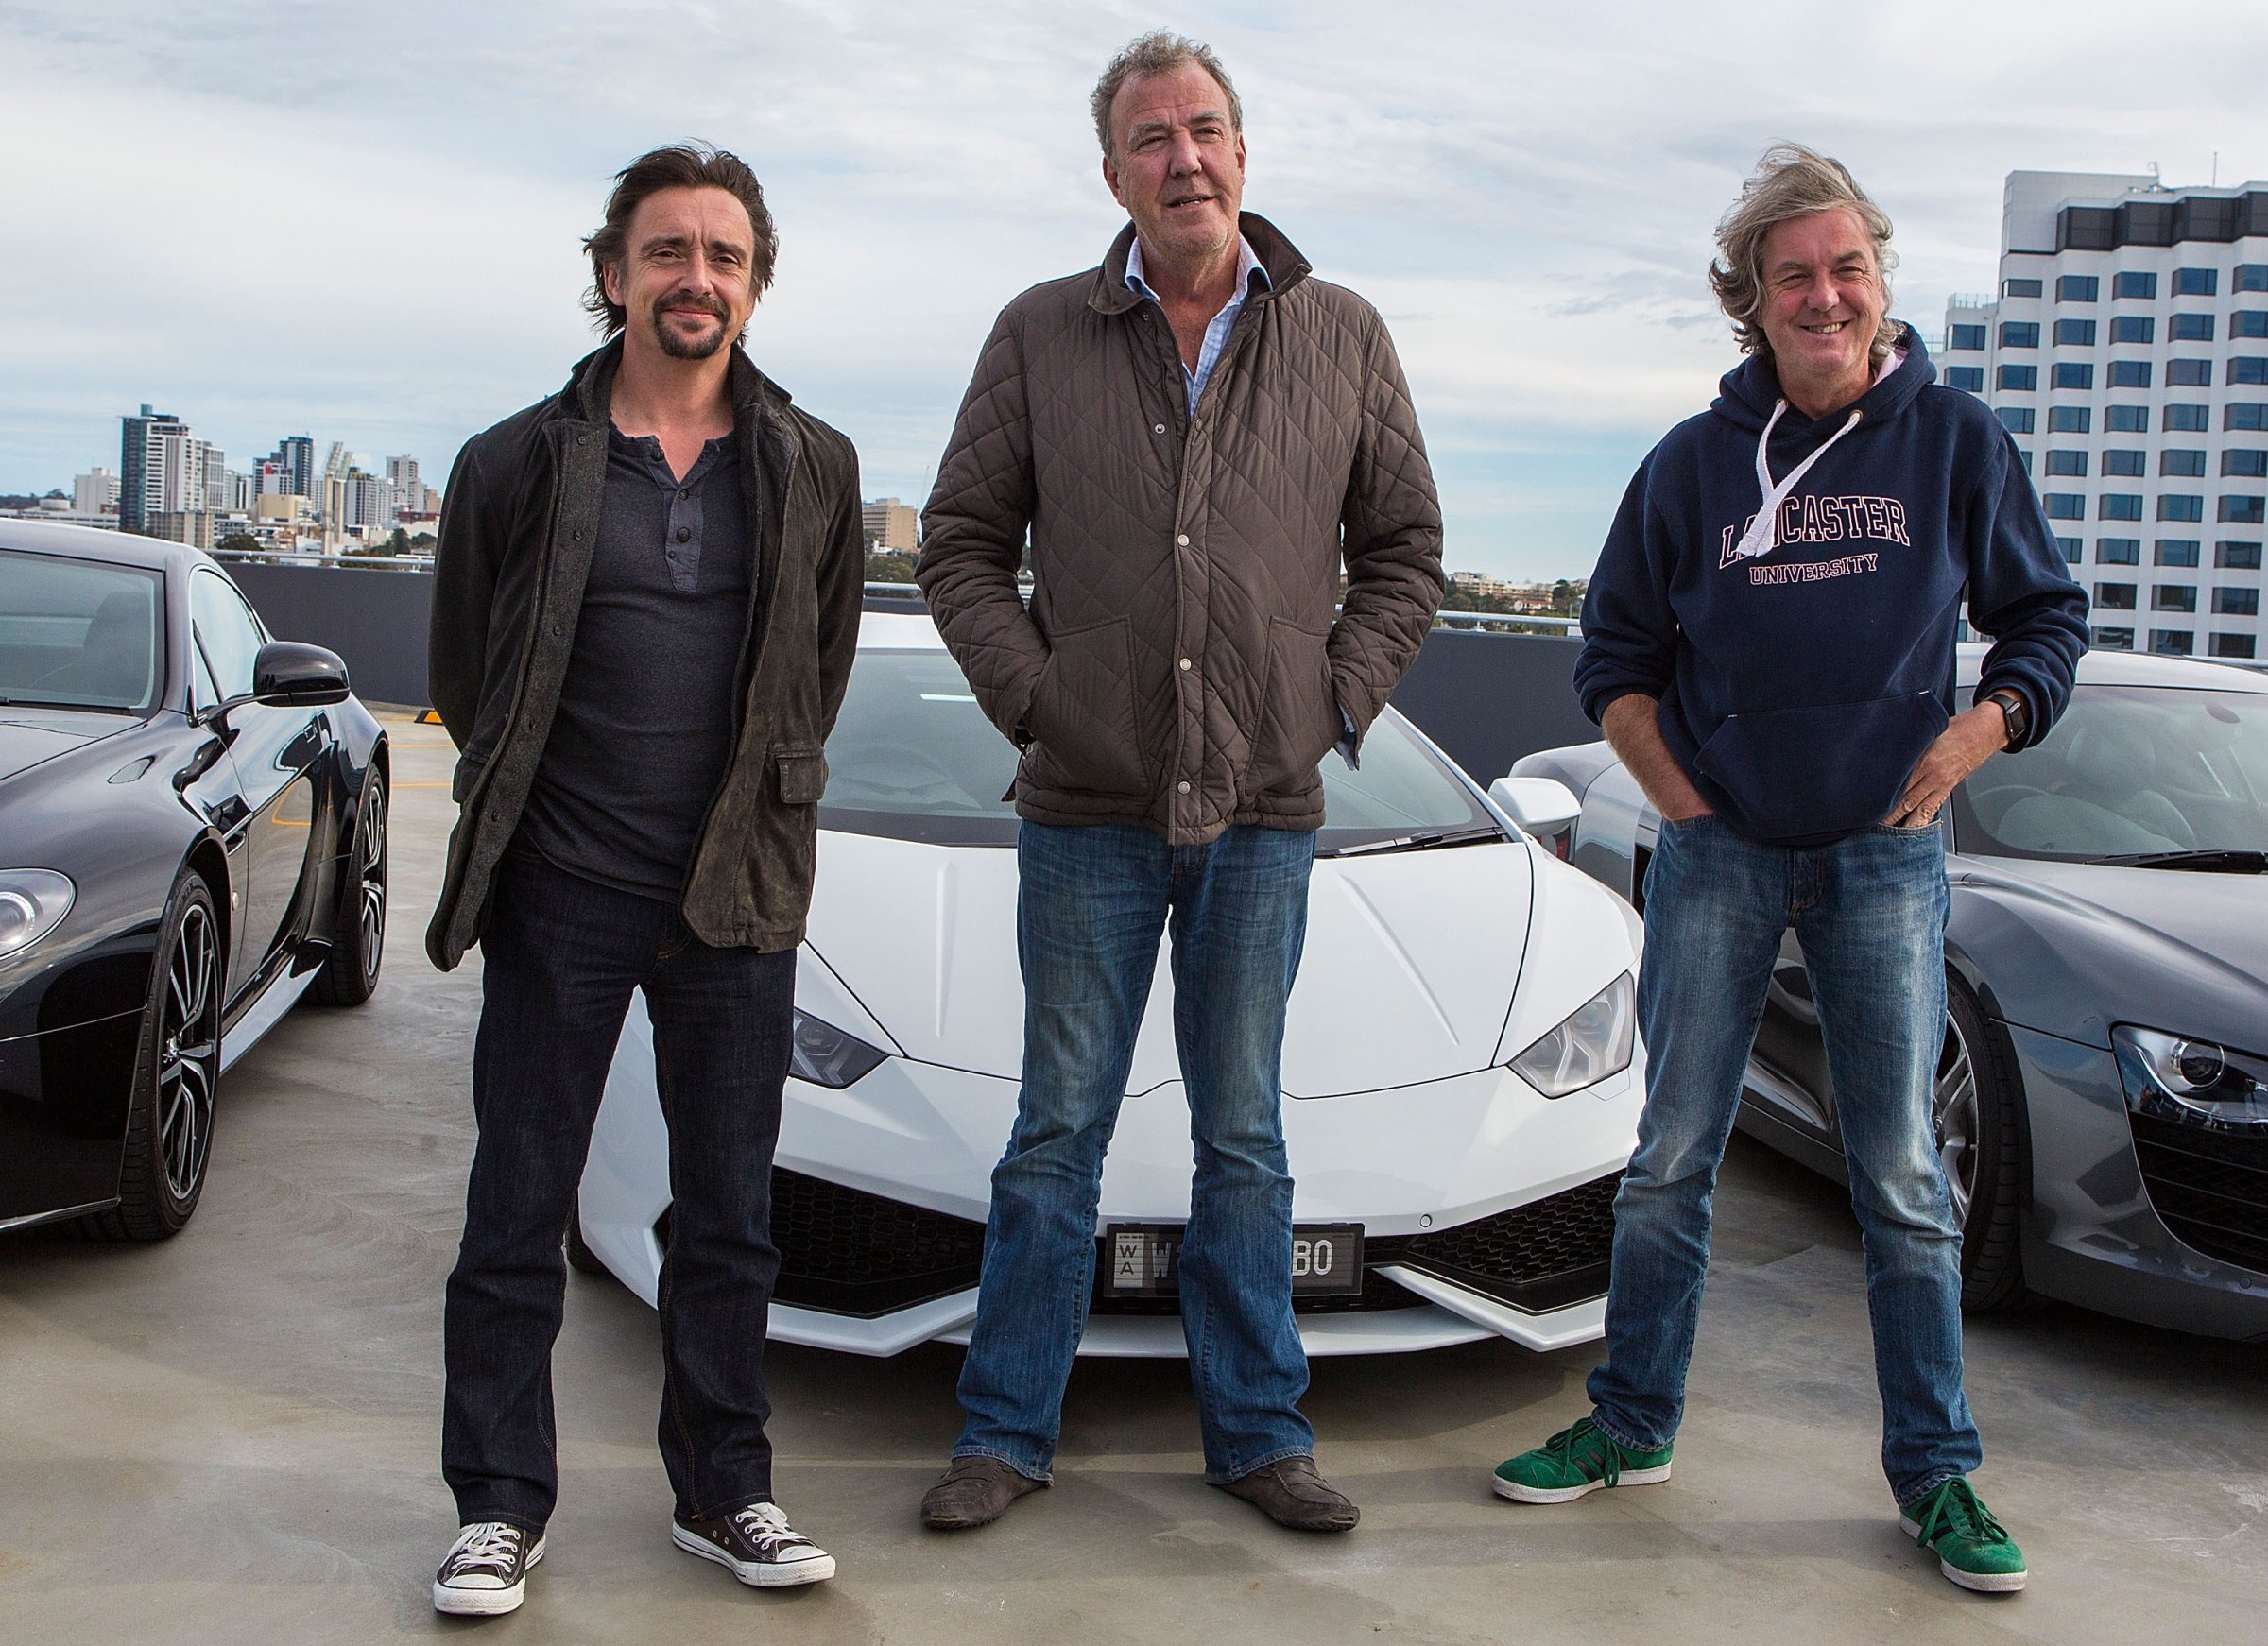 Jeremy Clarkson, Richard Hammond and James May during a press event on July 17, 2015 in Perth, Australia.